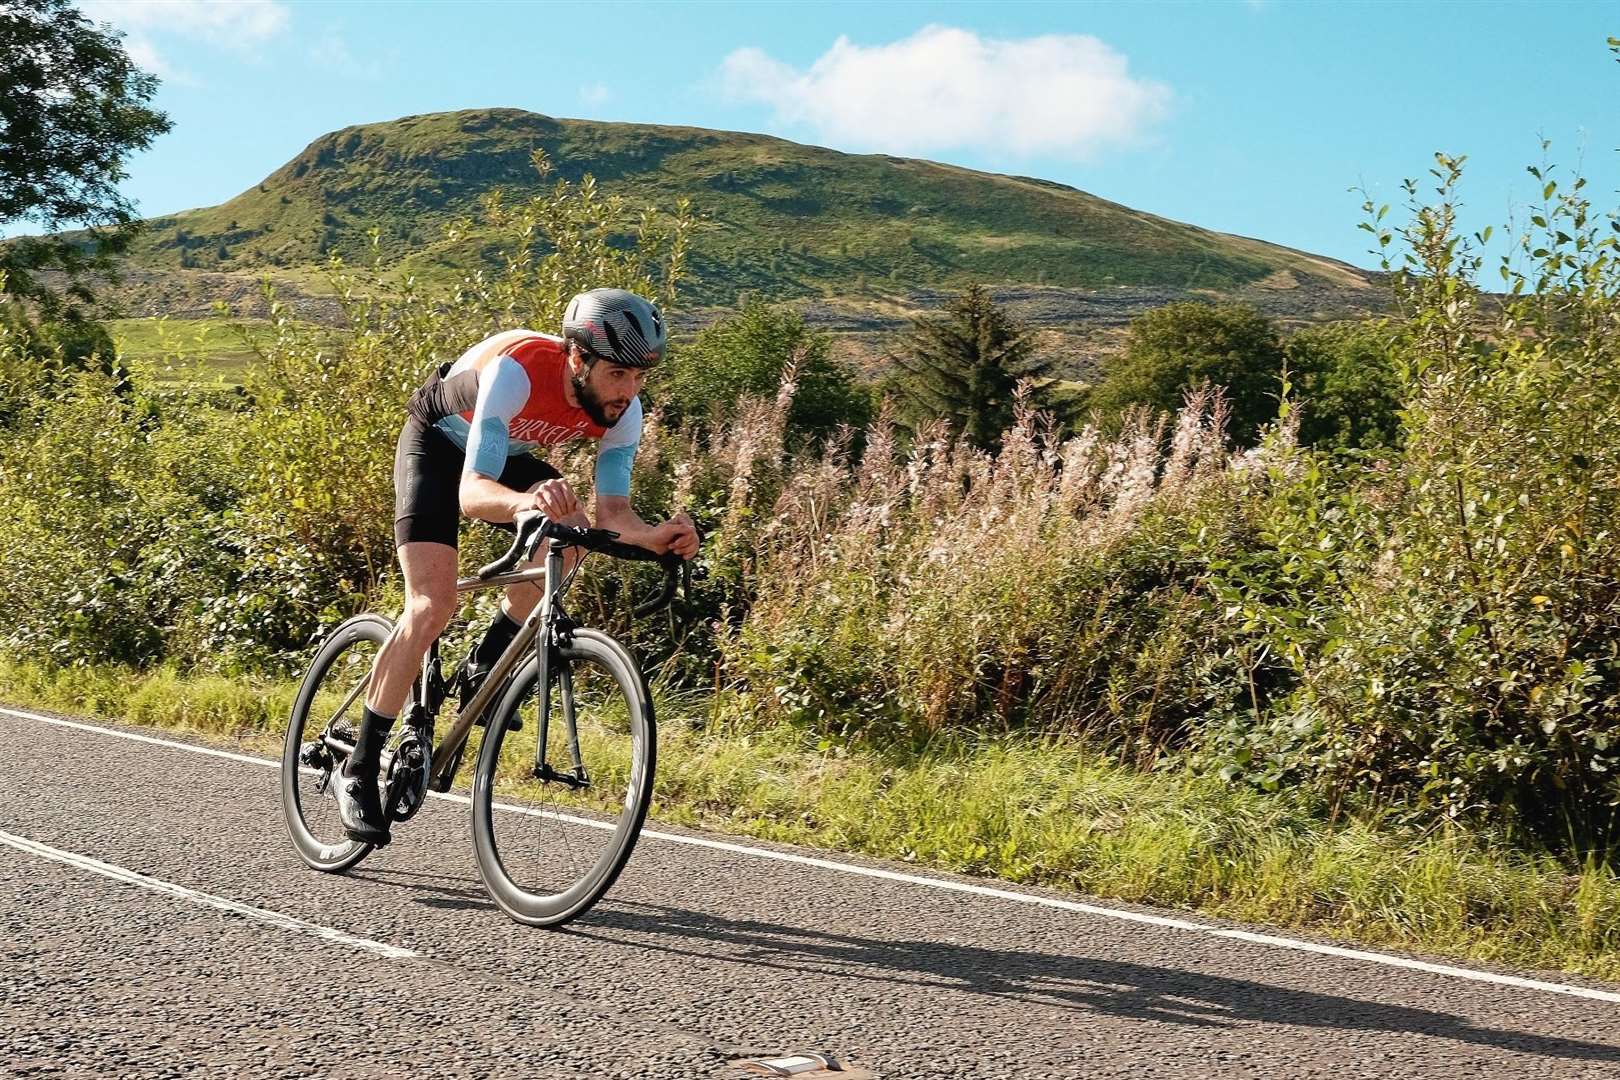 Gavin Dempster of Torvelo Racing in action ahead of his NC500 record attempt